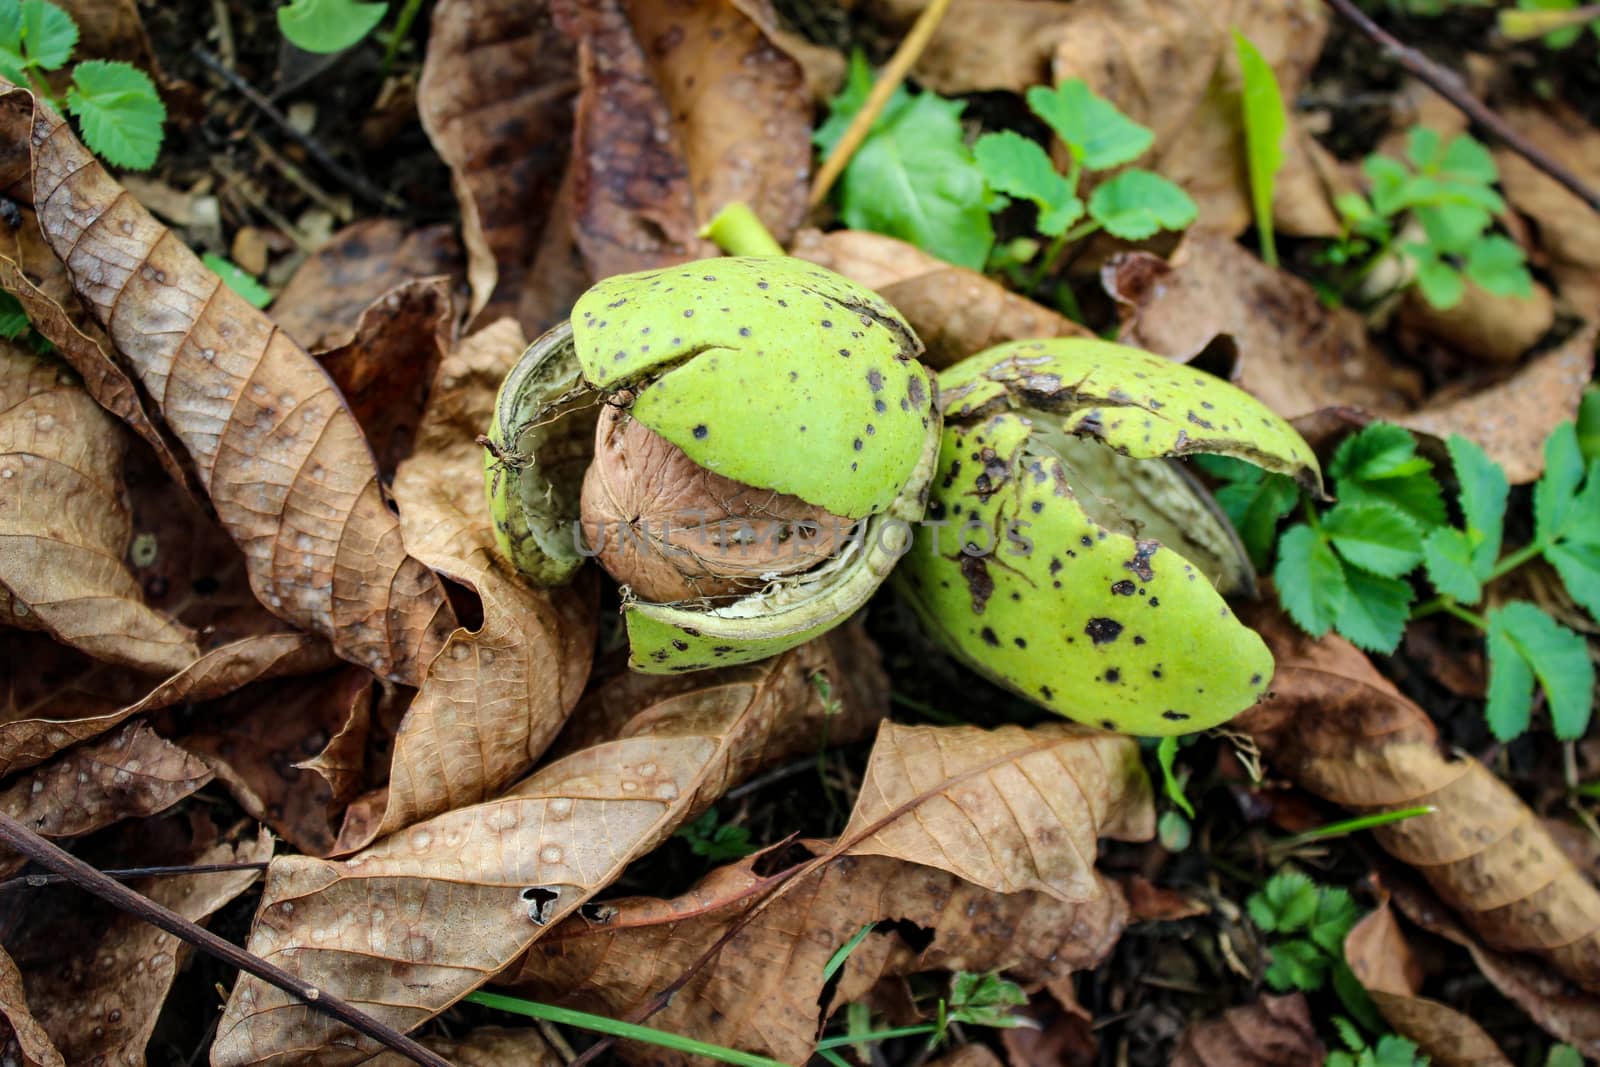 Photograph of a walnut fruit in a green shell on the ground where there is plenty of leaves and grass. Zavidovici, Bosnia and Herzegovina.